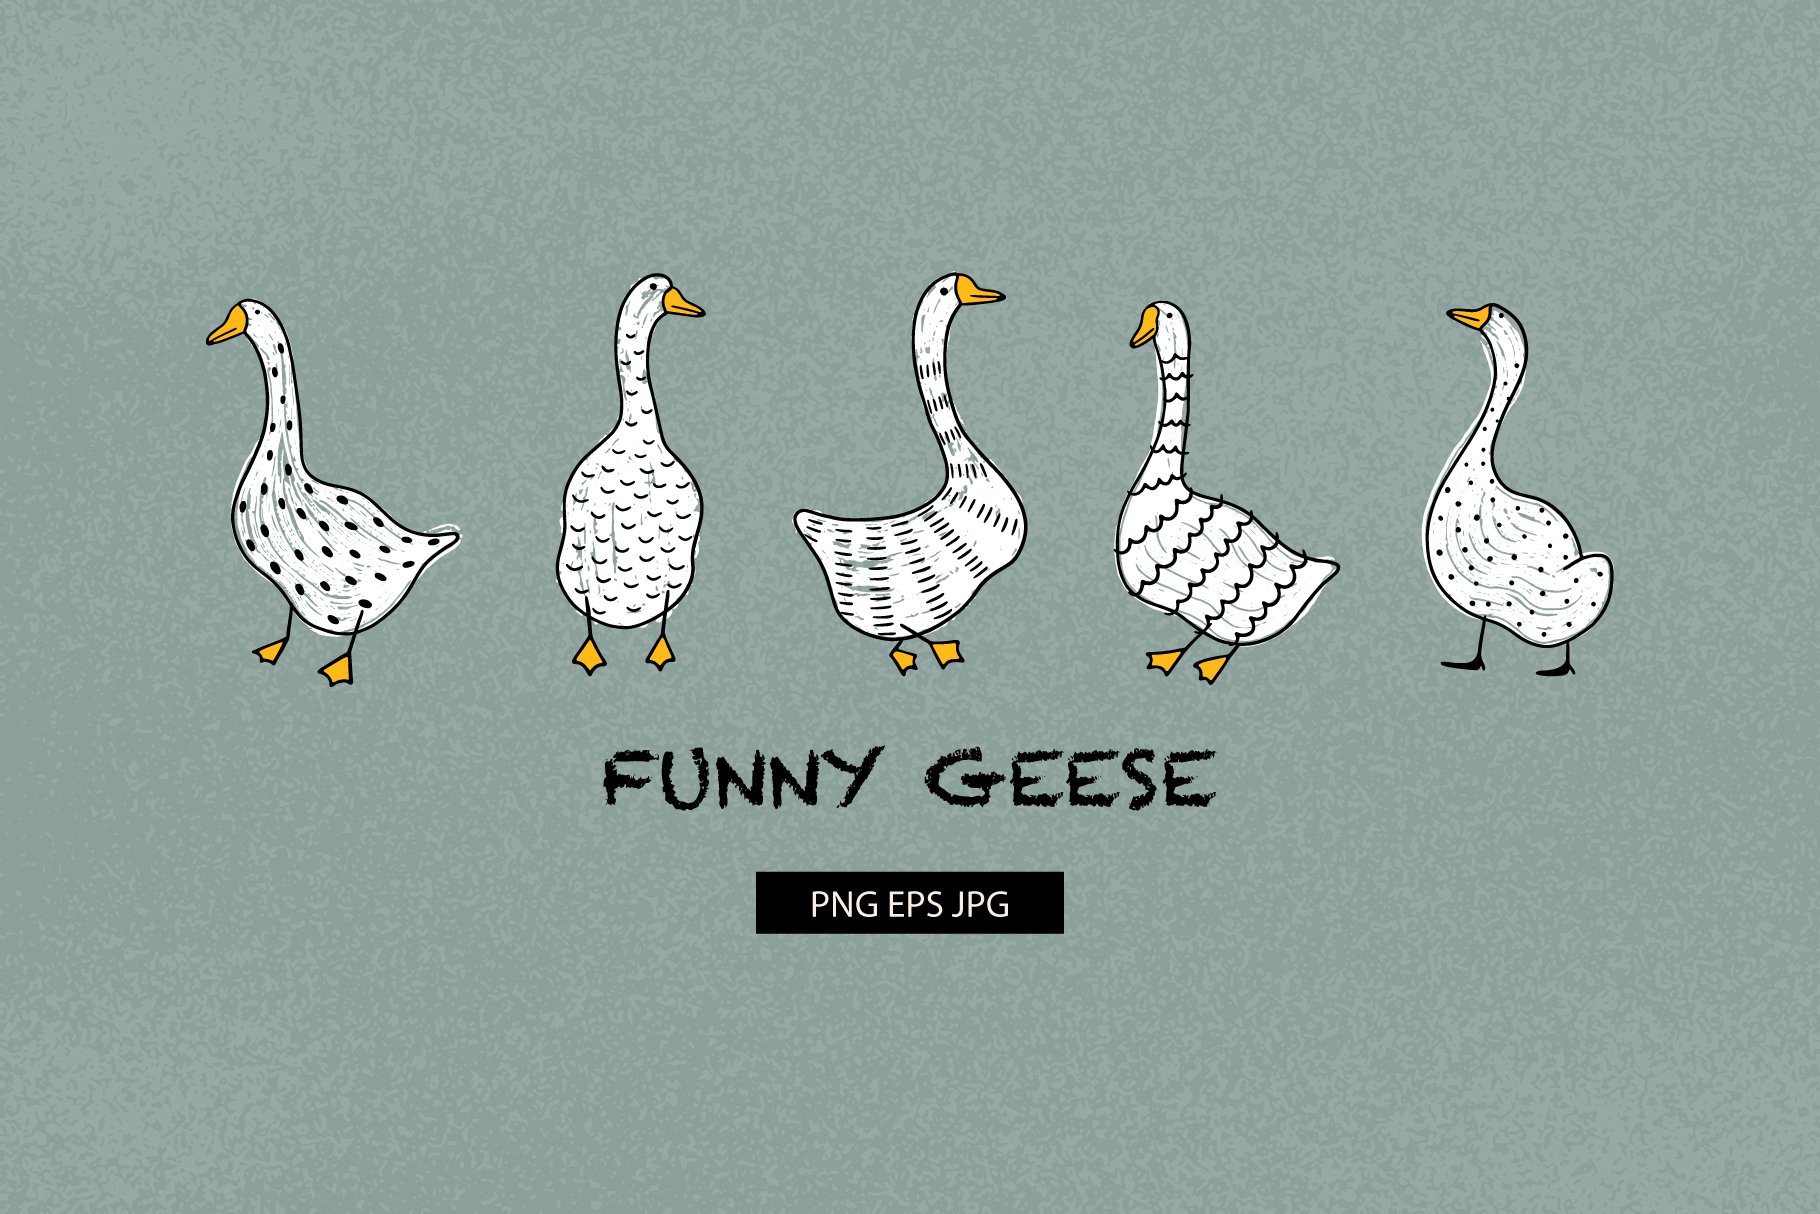 Funny geese cover image.